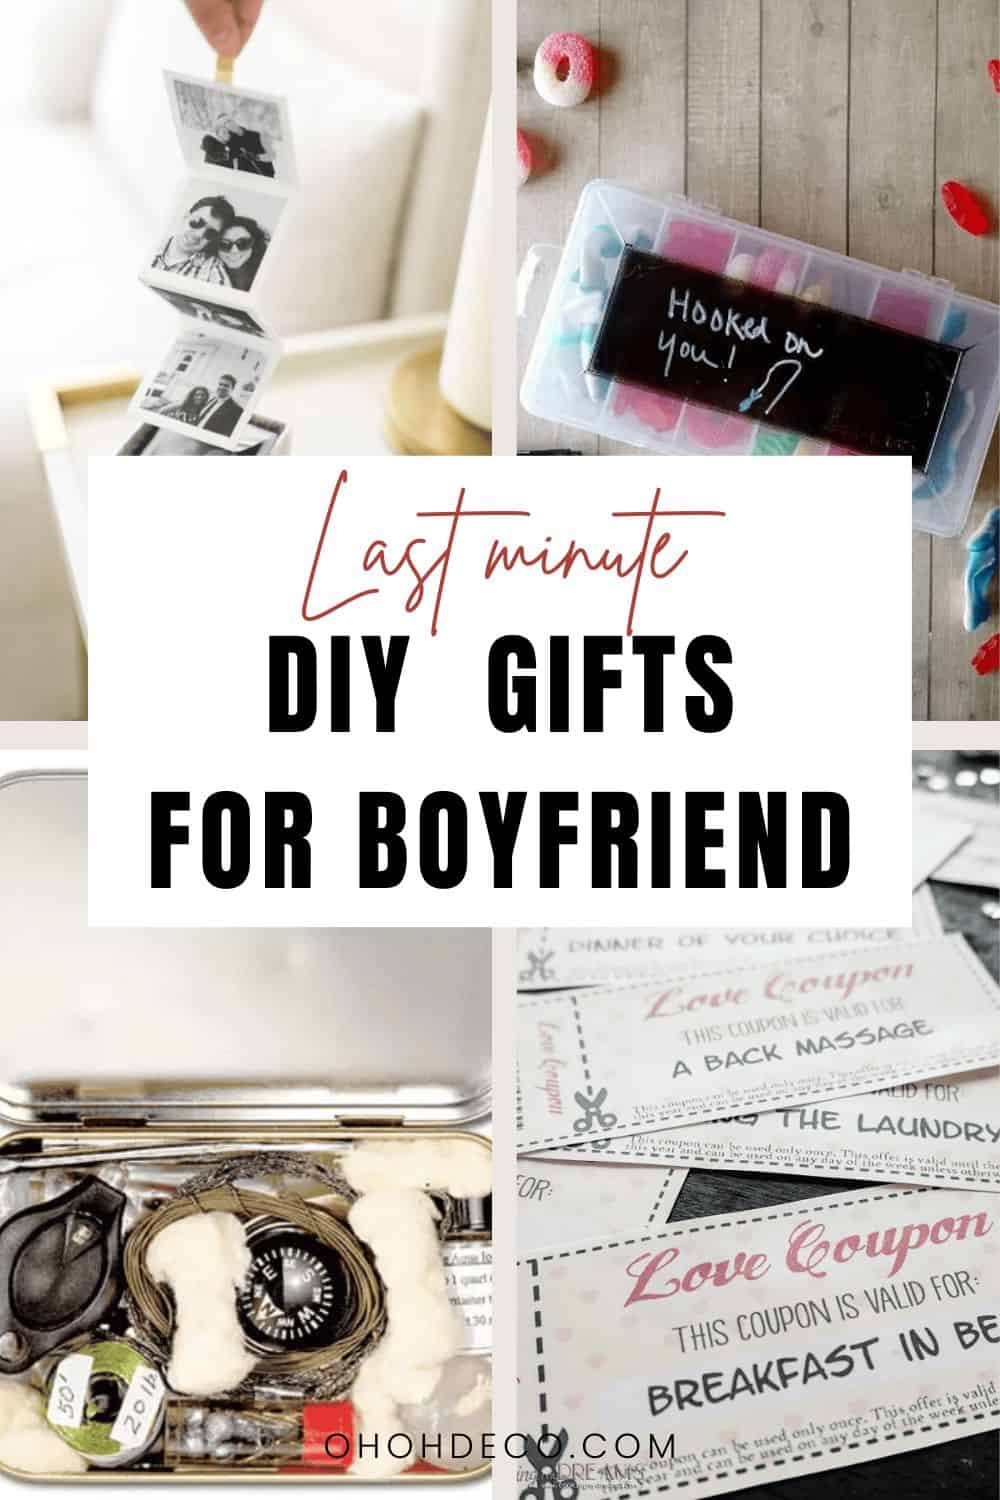 30 Unique DIY Gift Ideas for Men for Any Occasion - DIY & Crafts